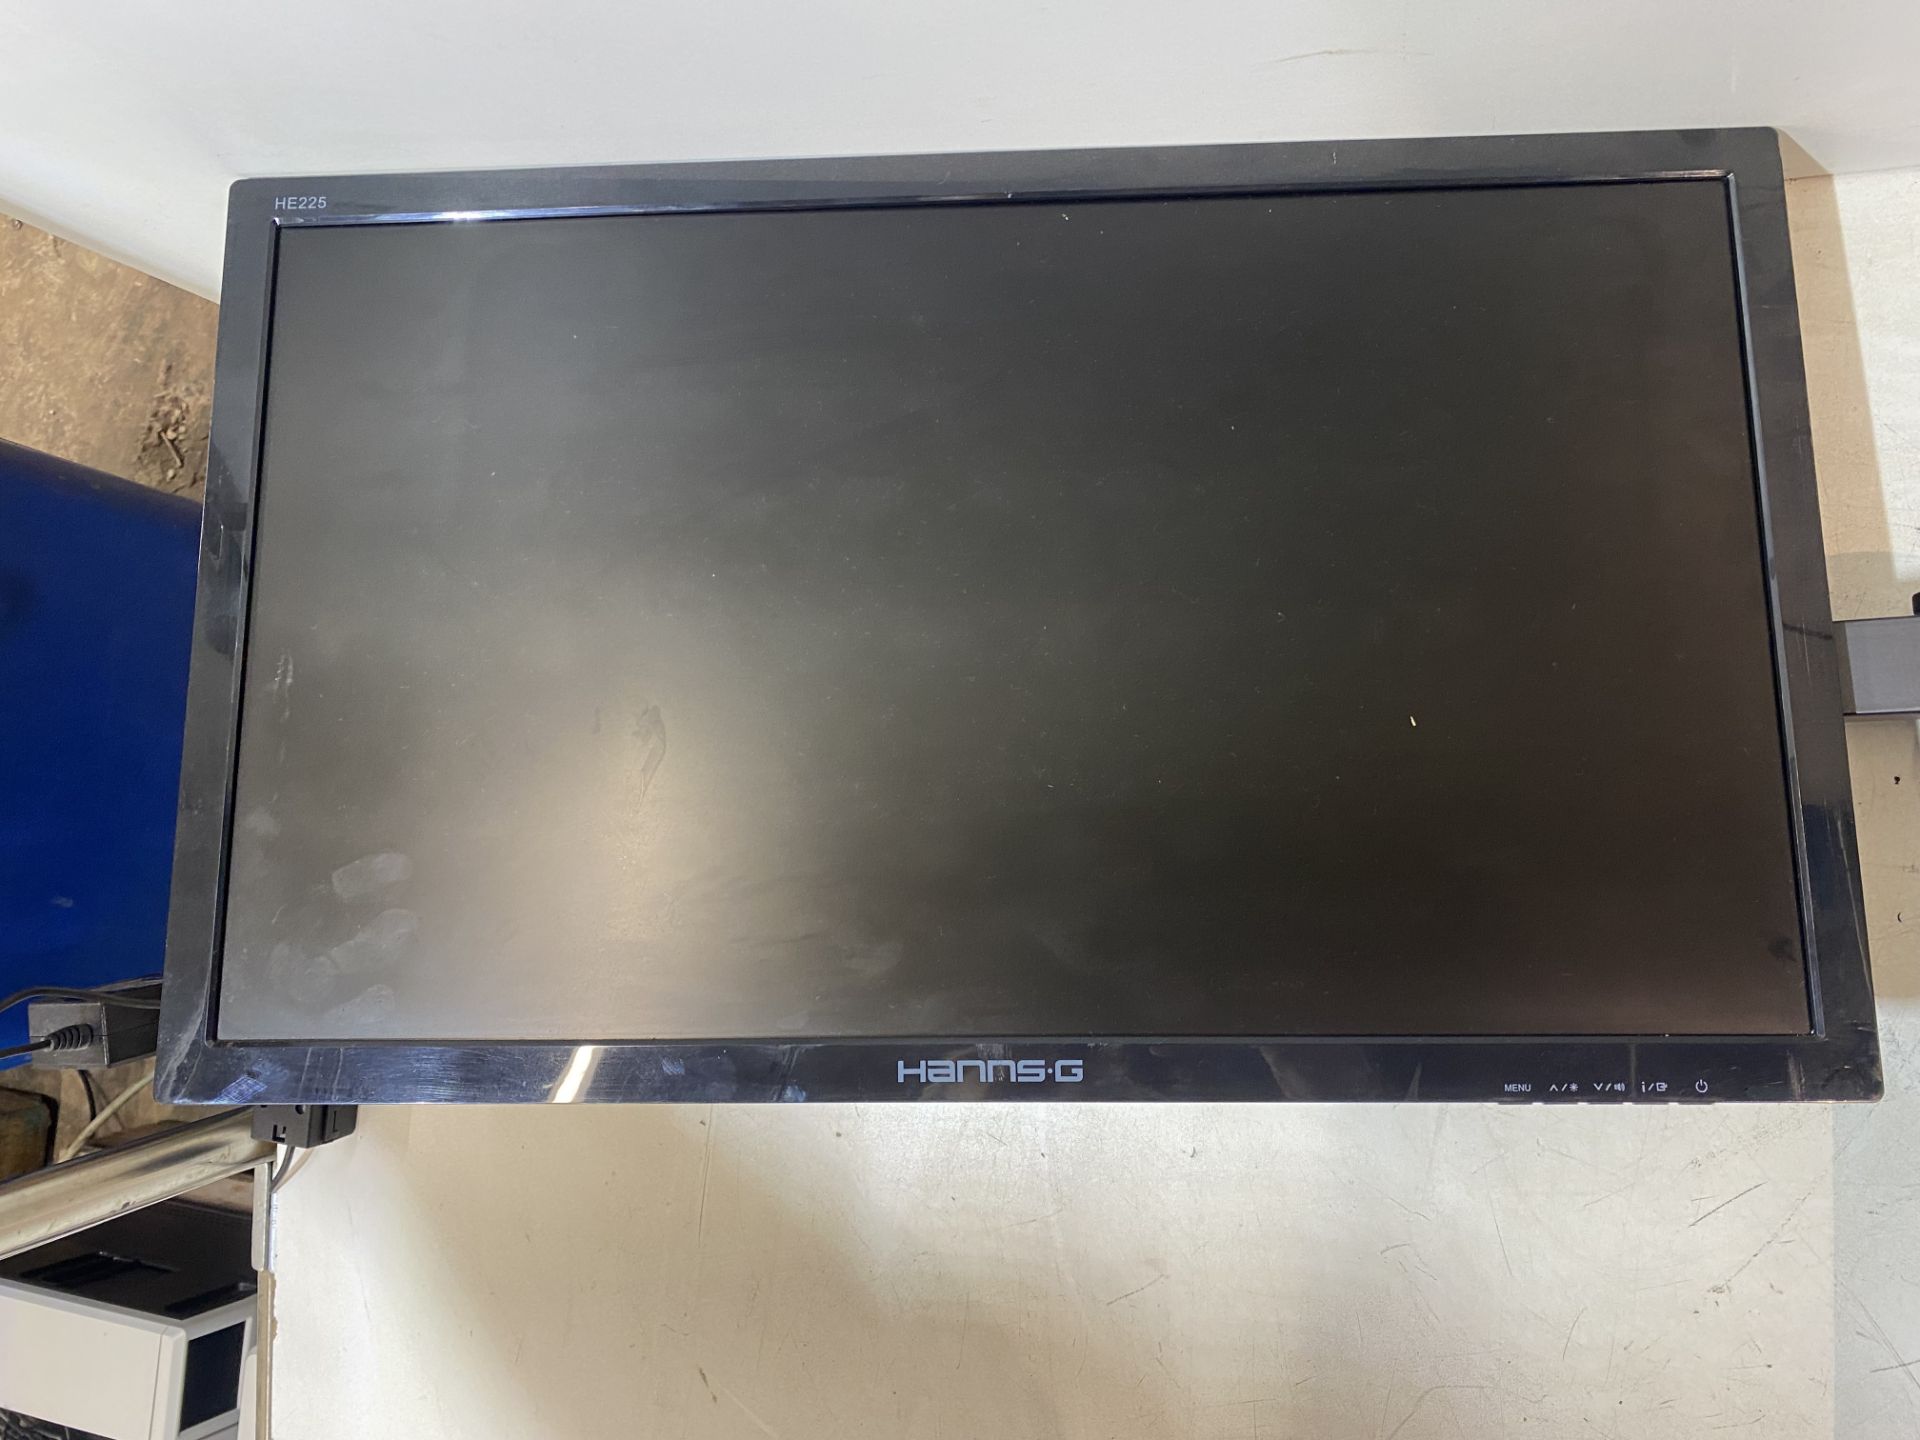 6 x Hanns G He225 21.5" LED LCD Monitors With Desk Mounted Monitor Stands - Image 14 of 17